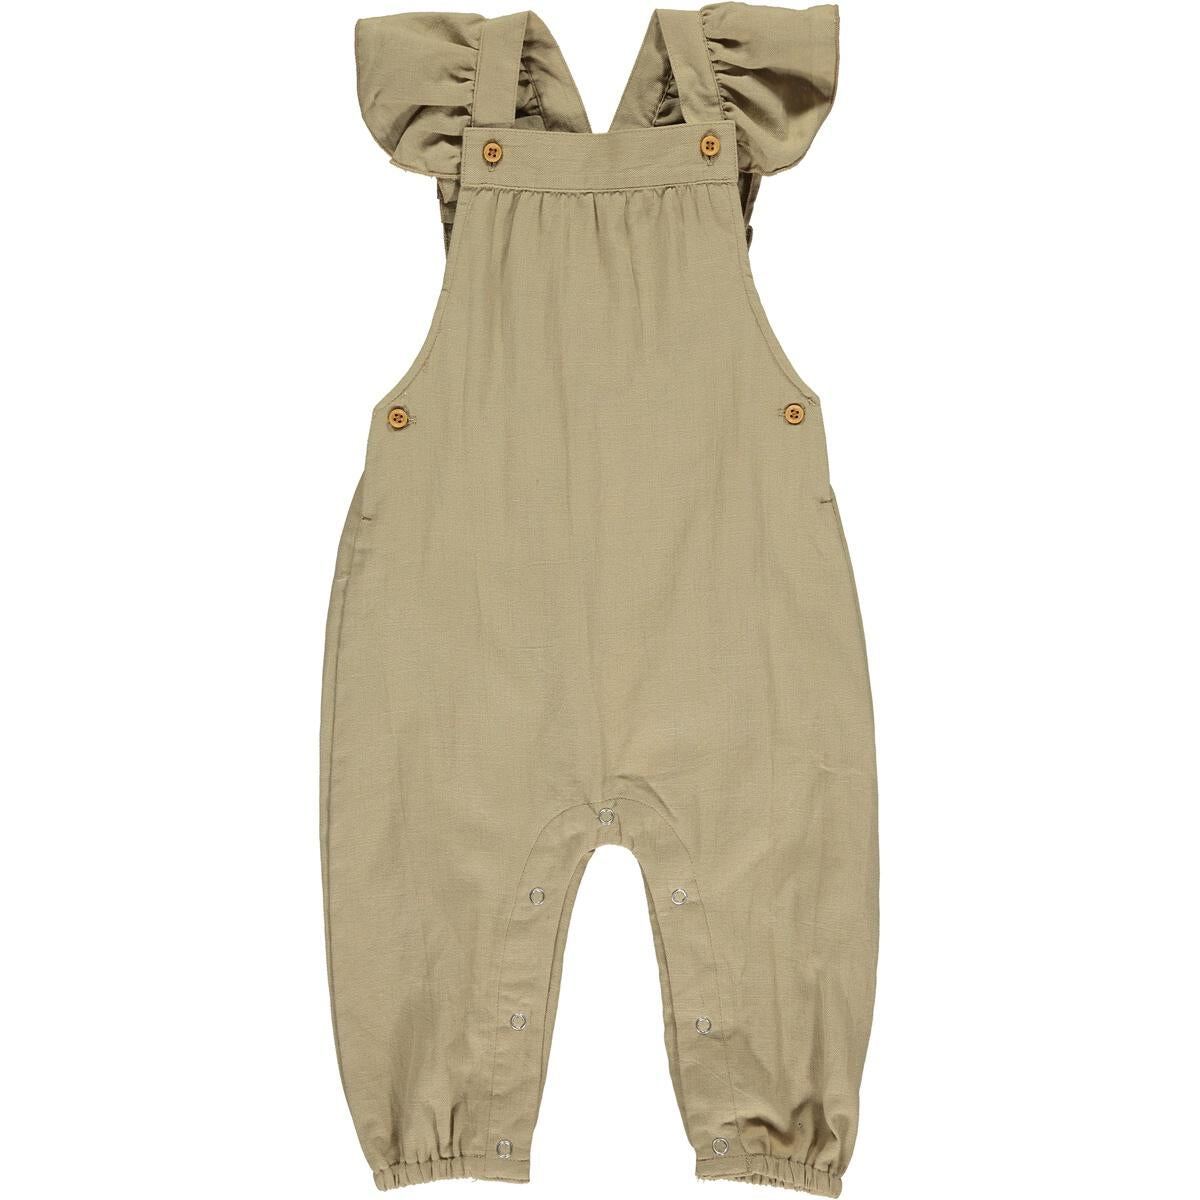 Eloise Ruffle Overall in Gold